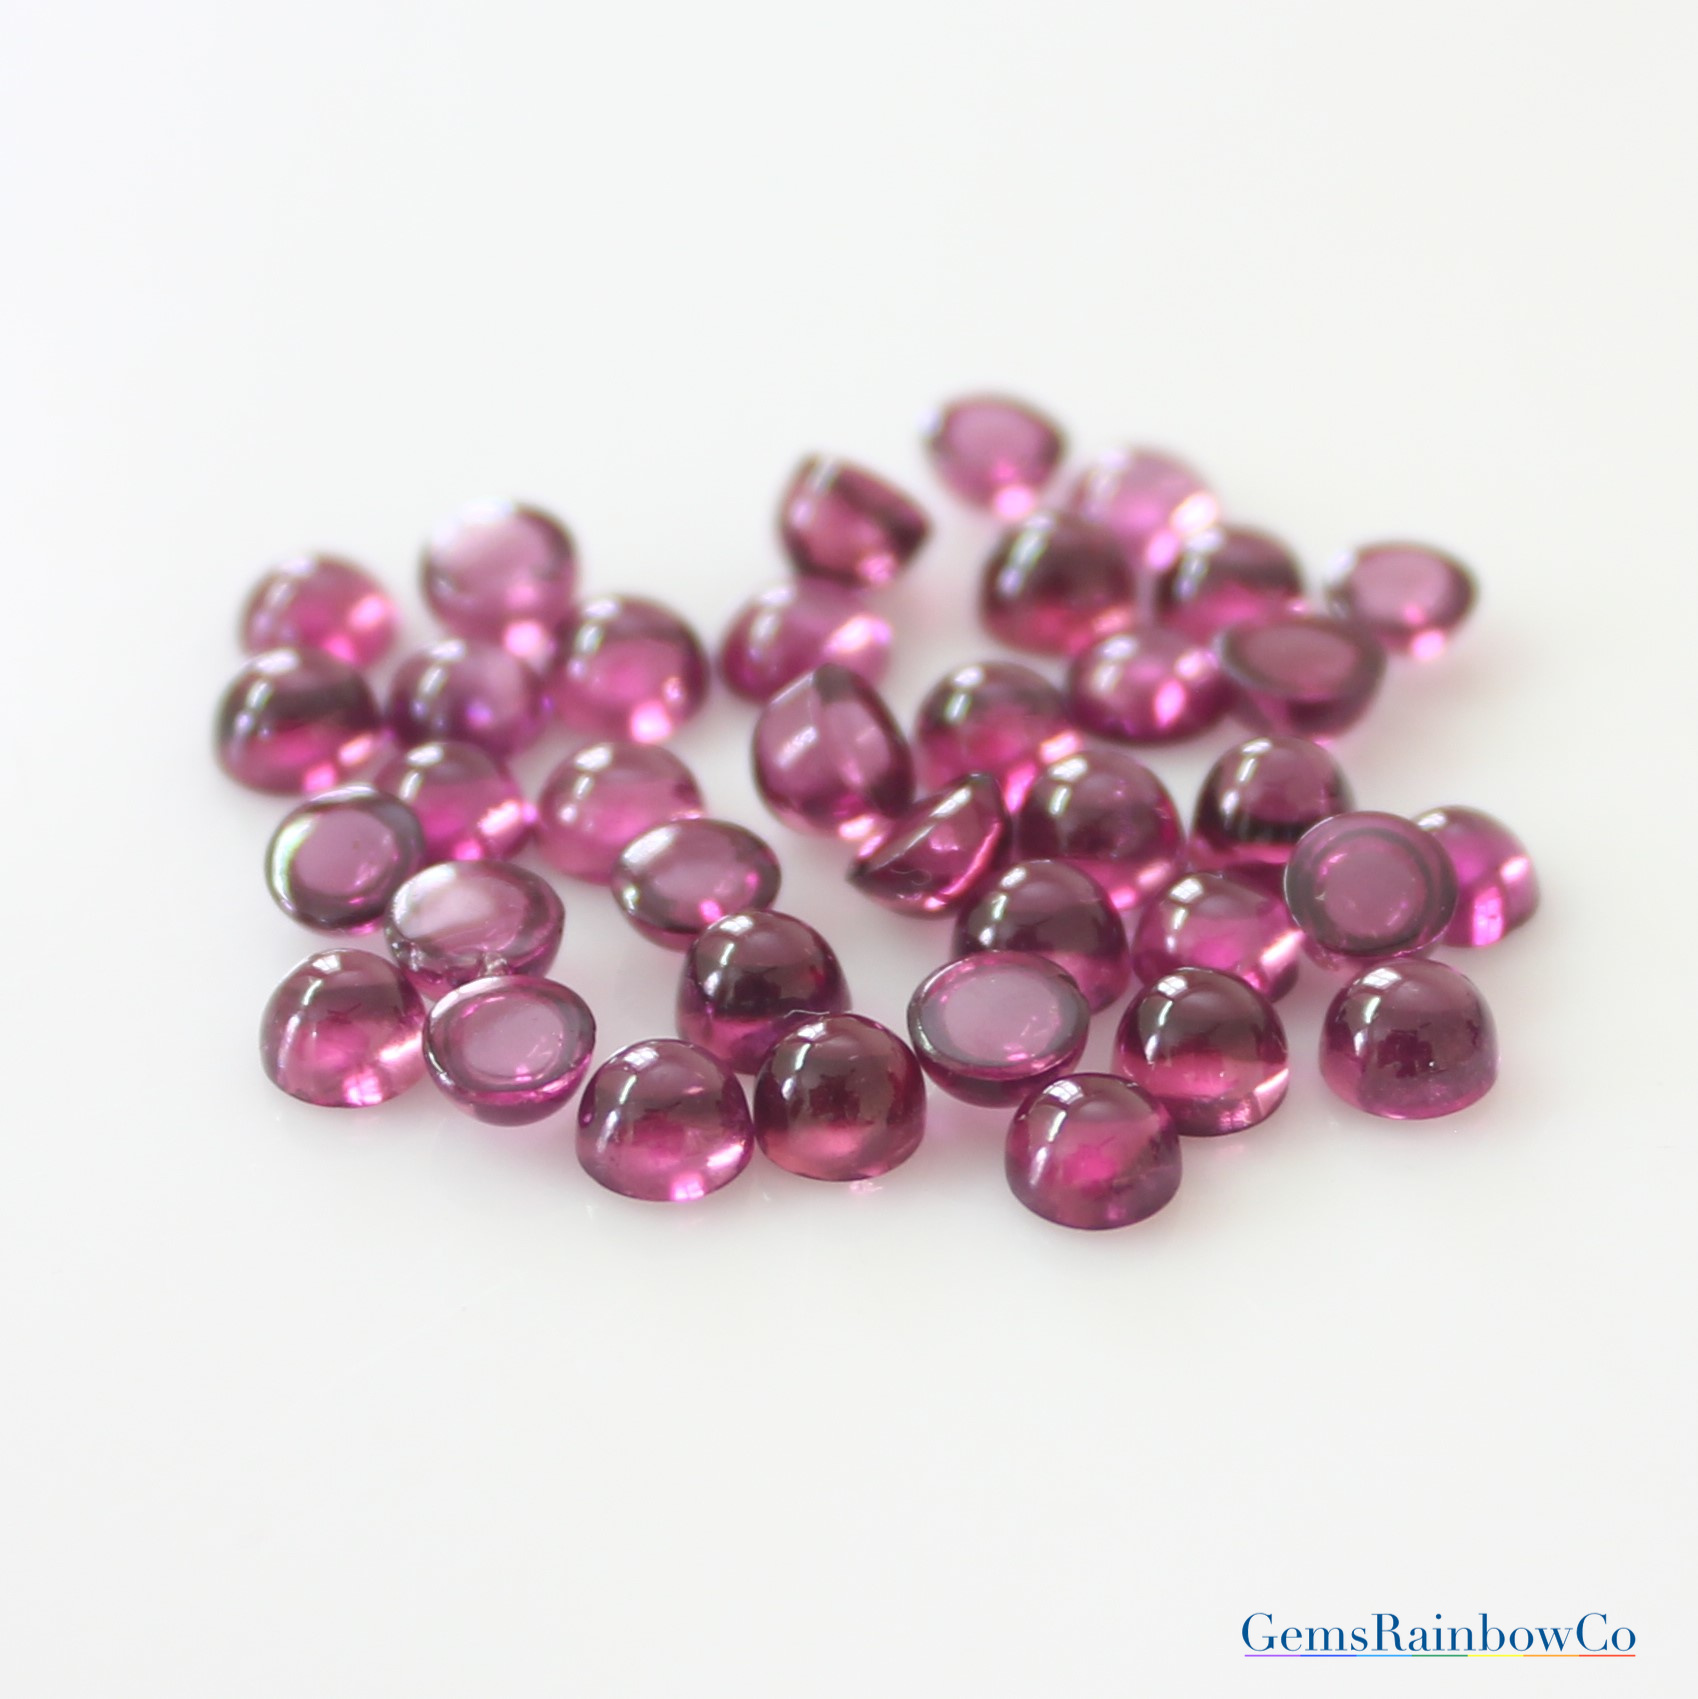 Garnet 6mm Round Rose-Cut Cabochon, Natural, Sold by Each